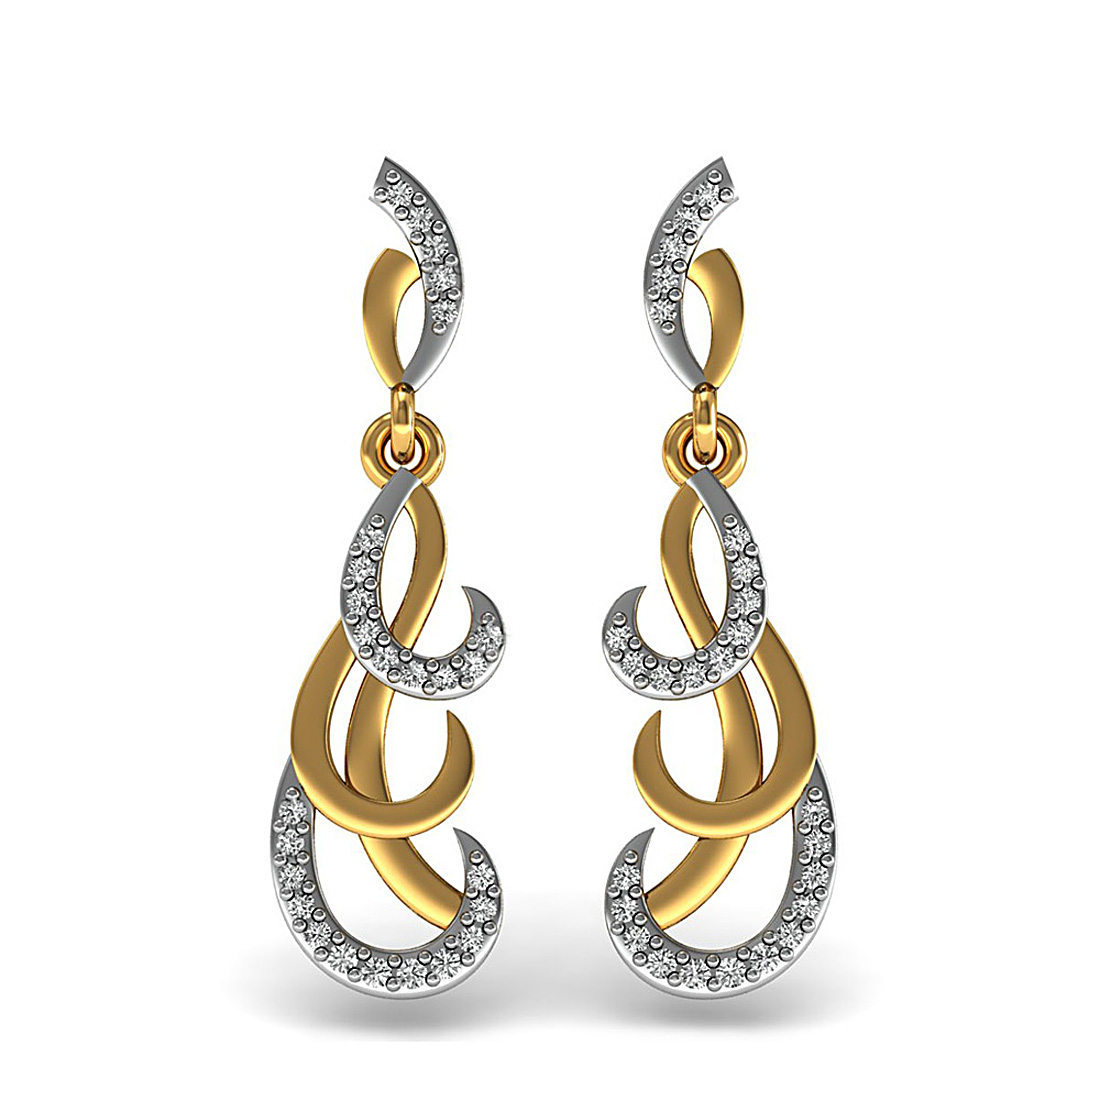 Beautiful pair of leaf style dangle earrings studded with natural diamond and made in 18k solid yellow gold.